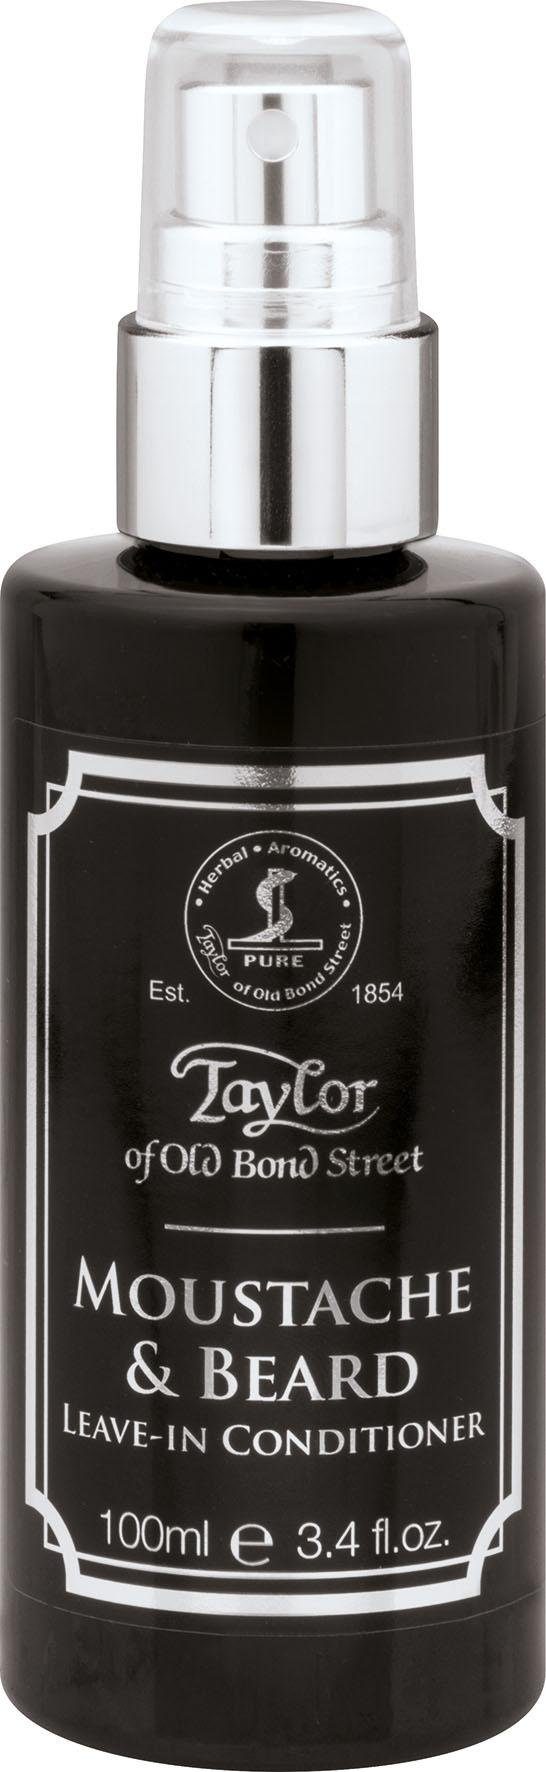 Taylor Old & Street Conditioner Bond Leave-In of Bartconditioner Moustache Beard